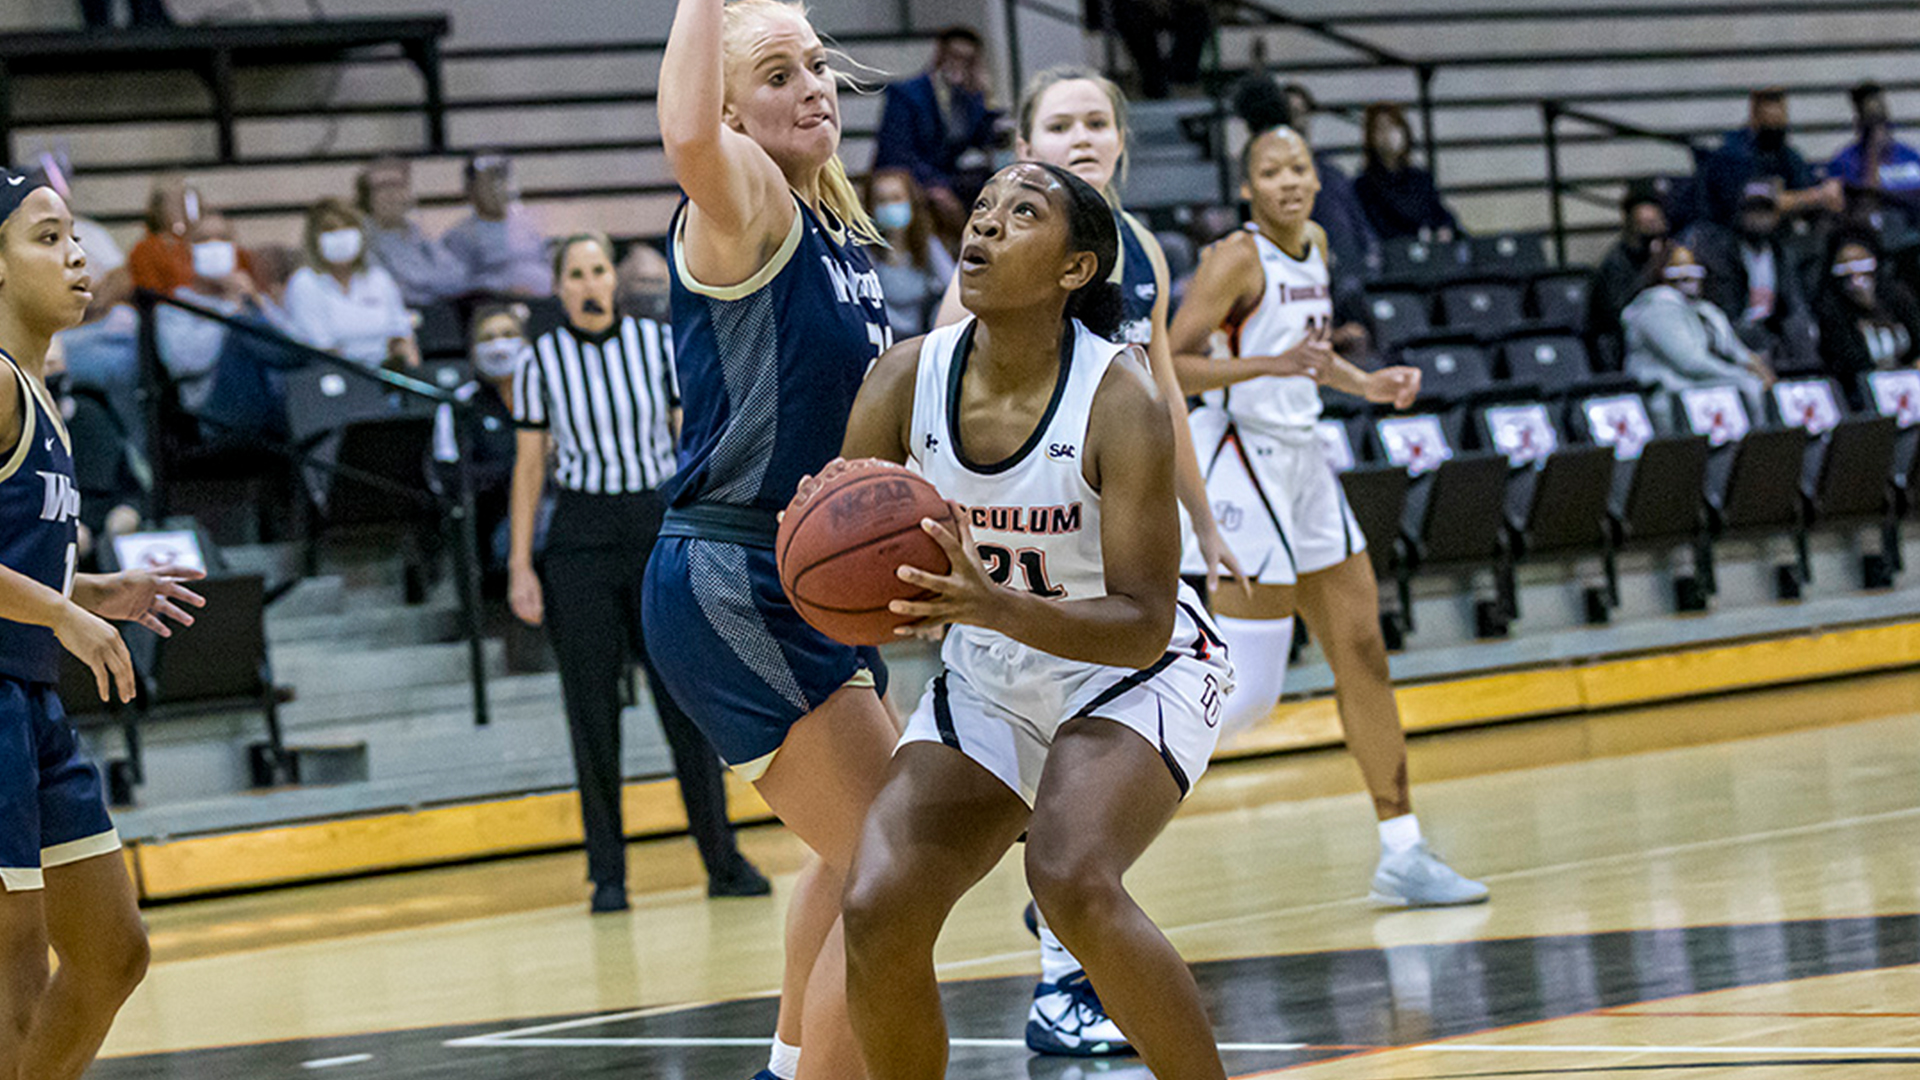 Aliyah Miller scored a game-high 23 points to lead Tusculum to a 63-52 win over Wingate (Photo by Chuck Williams)